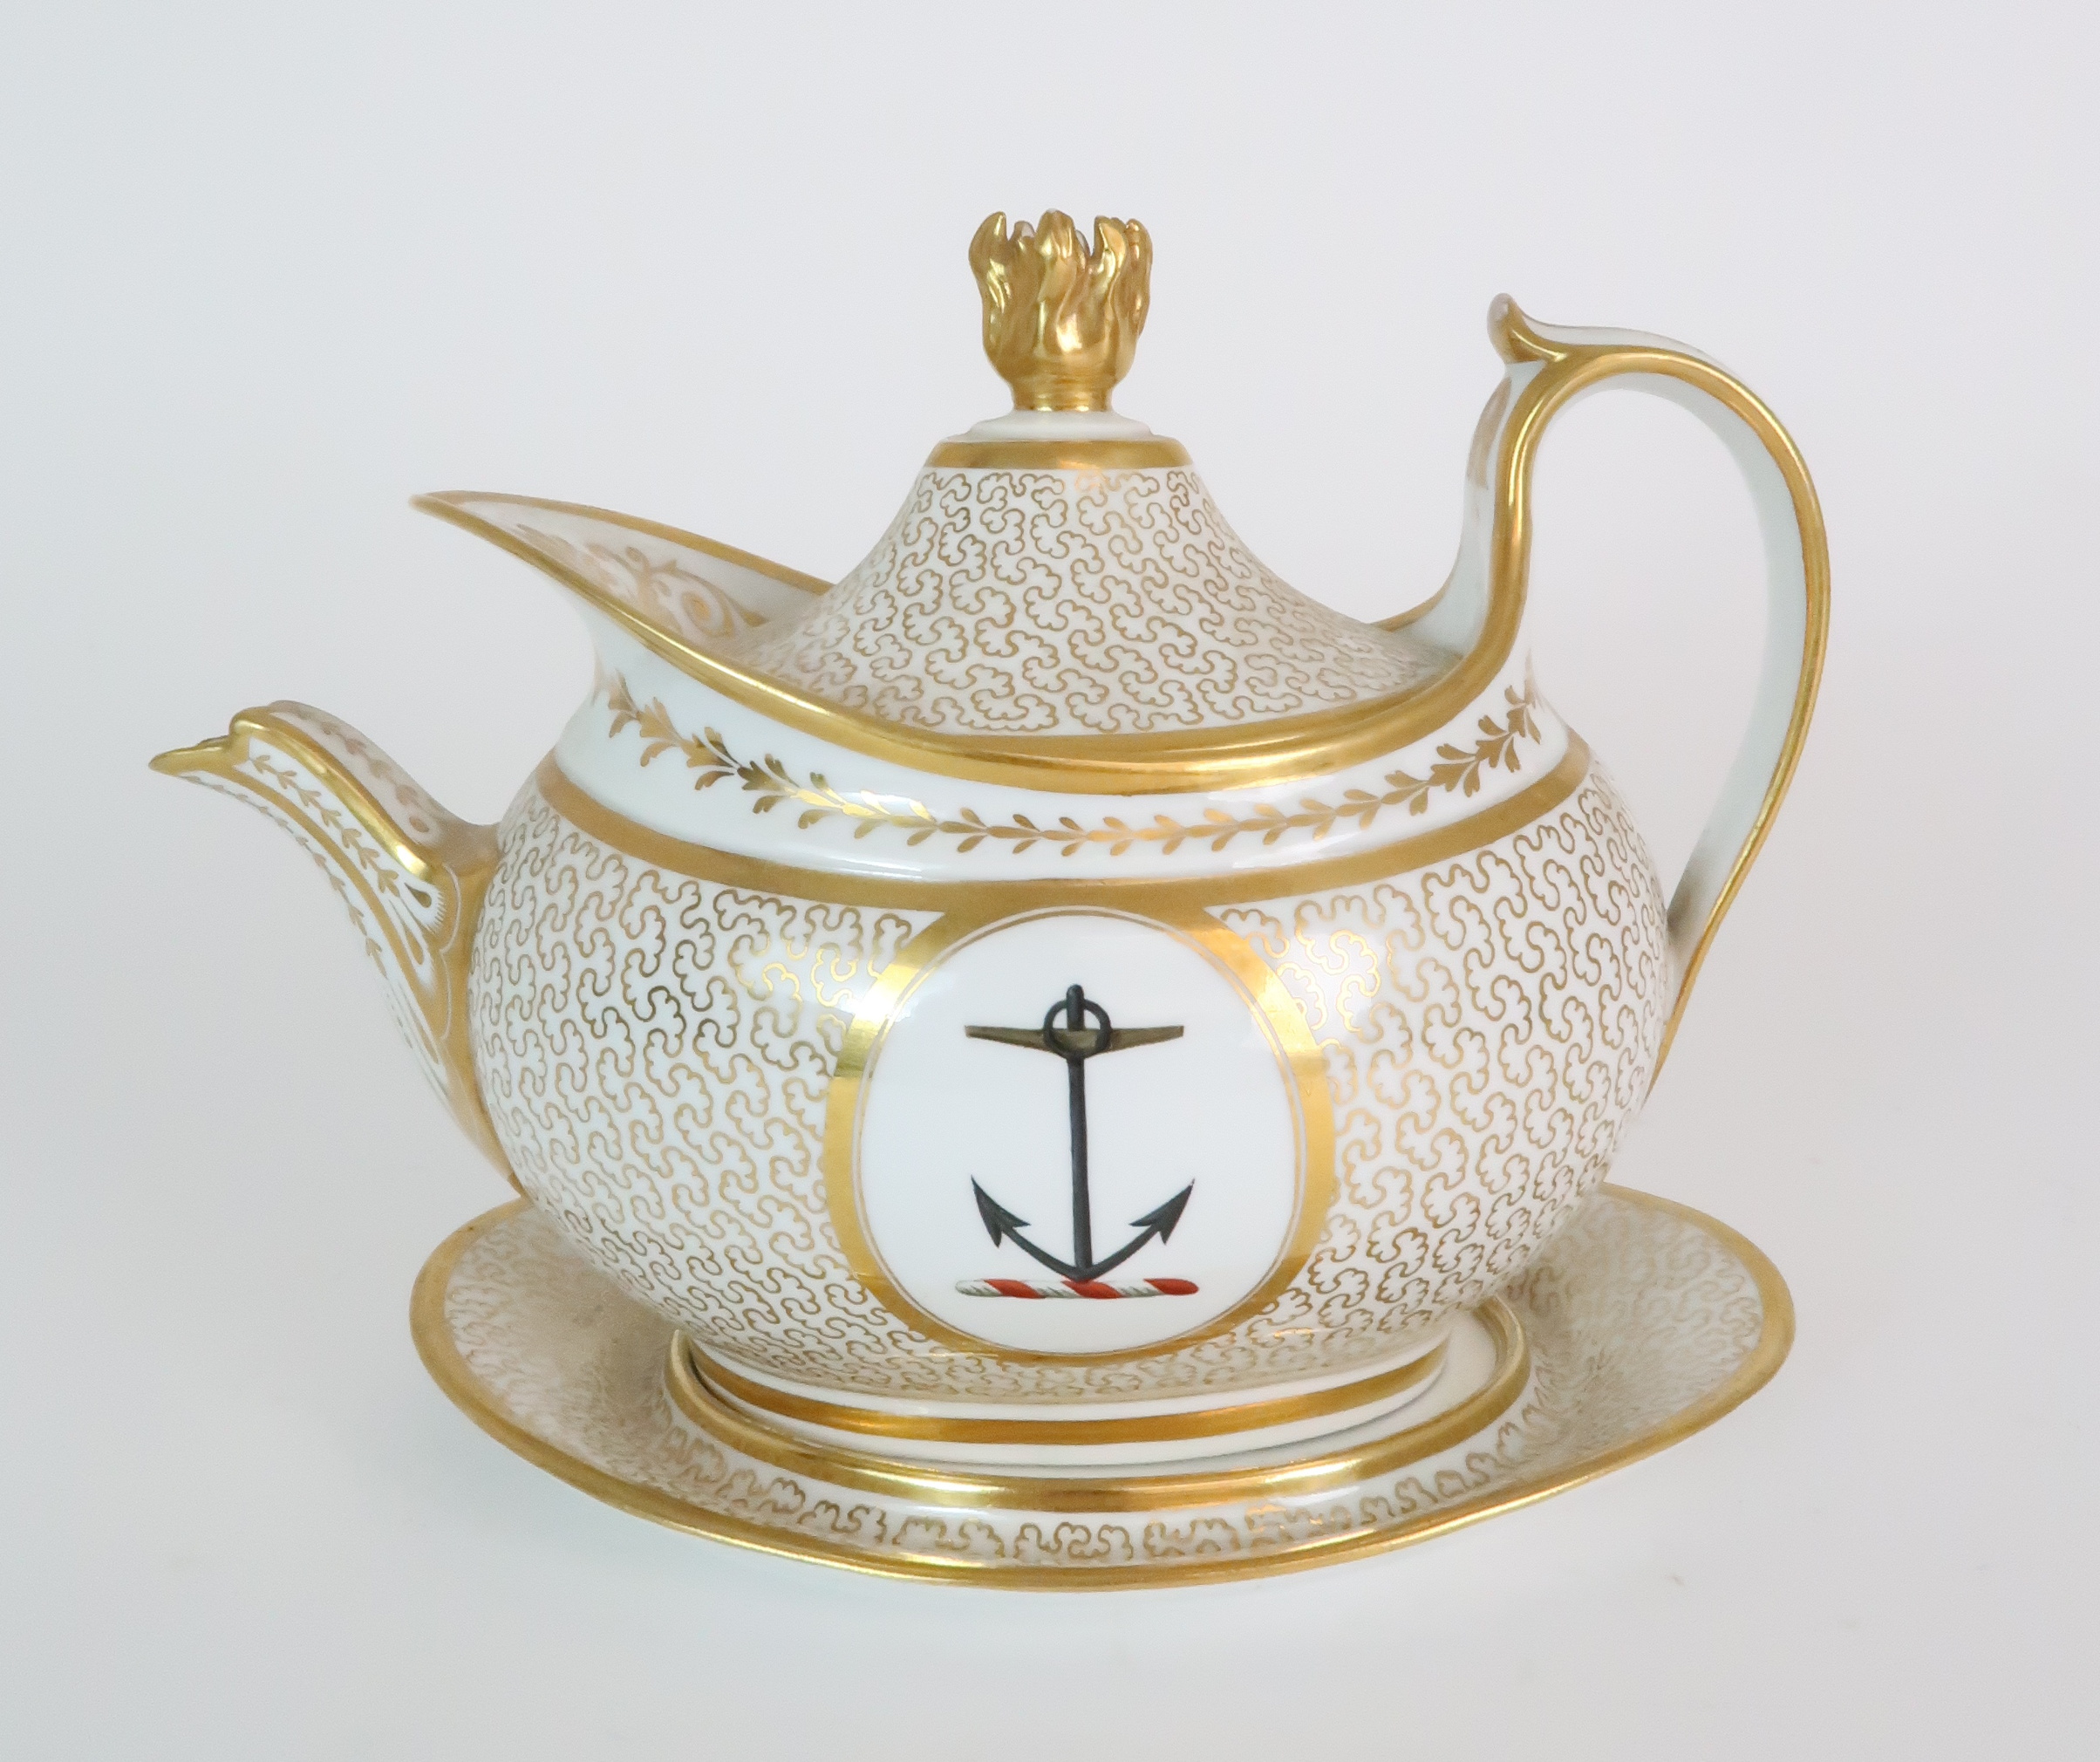 AN EARLY 19TH CENTURY BARR FLIGHT & BARR OVAL TEAPOT, COVER AND MATCHING STAND the cover with gilt